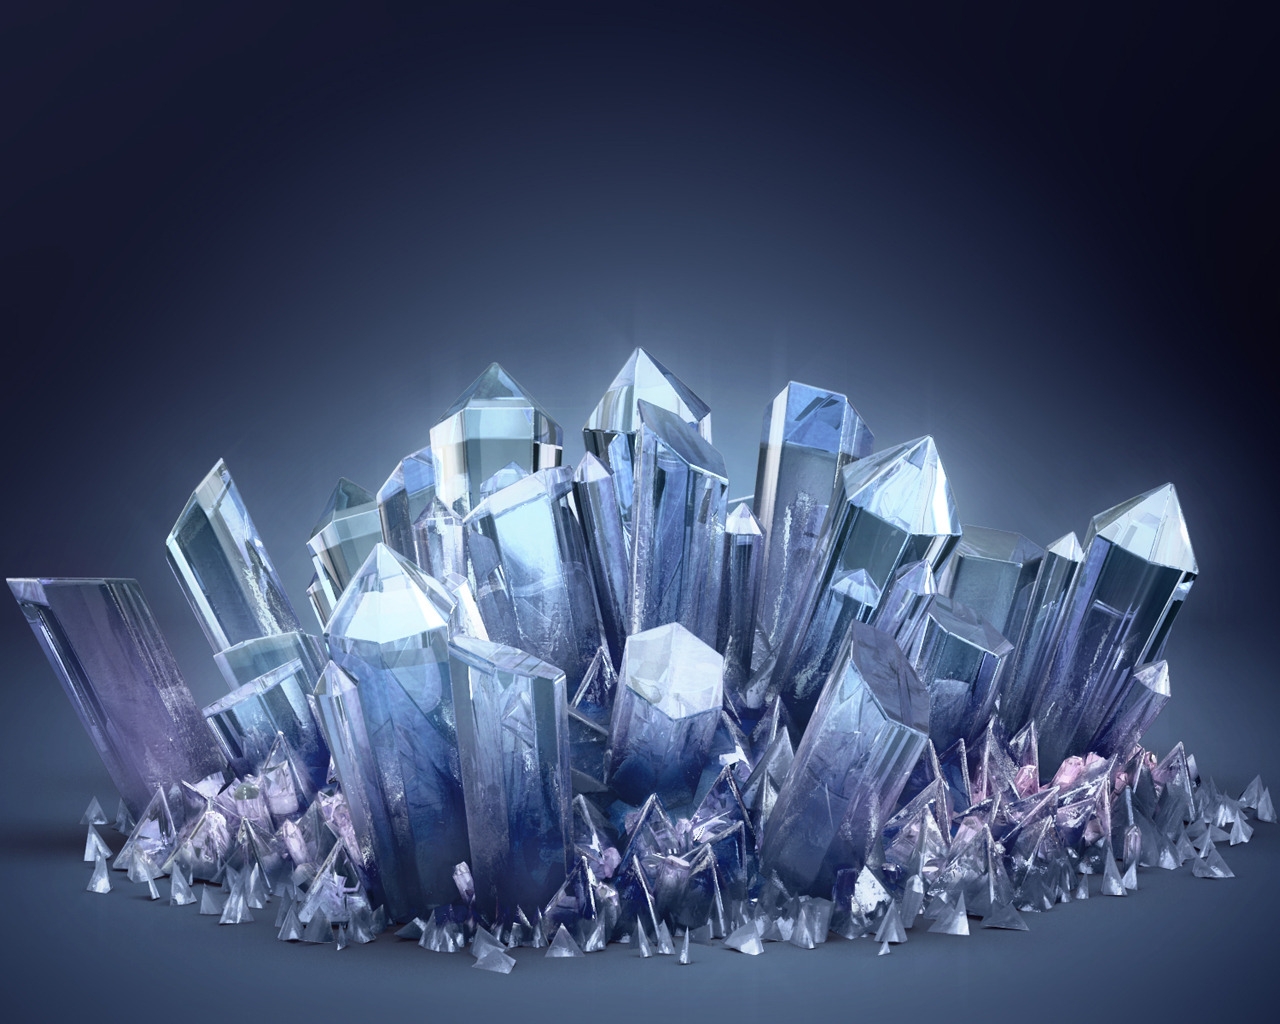 Crystals for 1280 x 1024 resolution